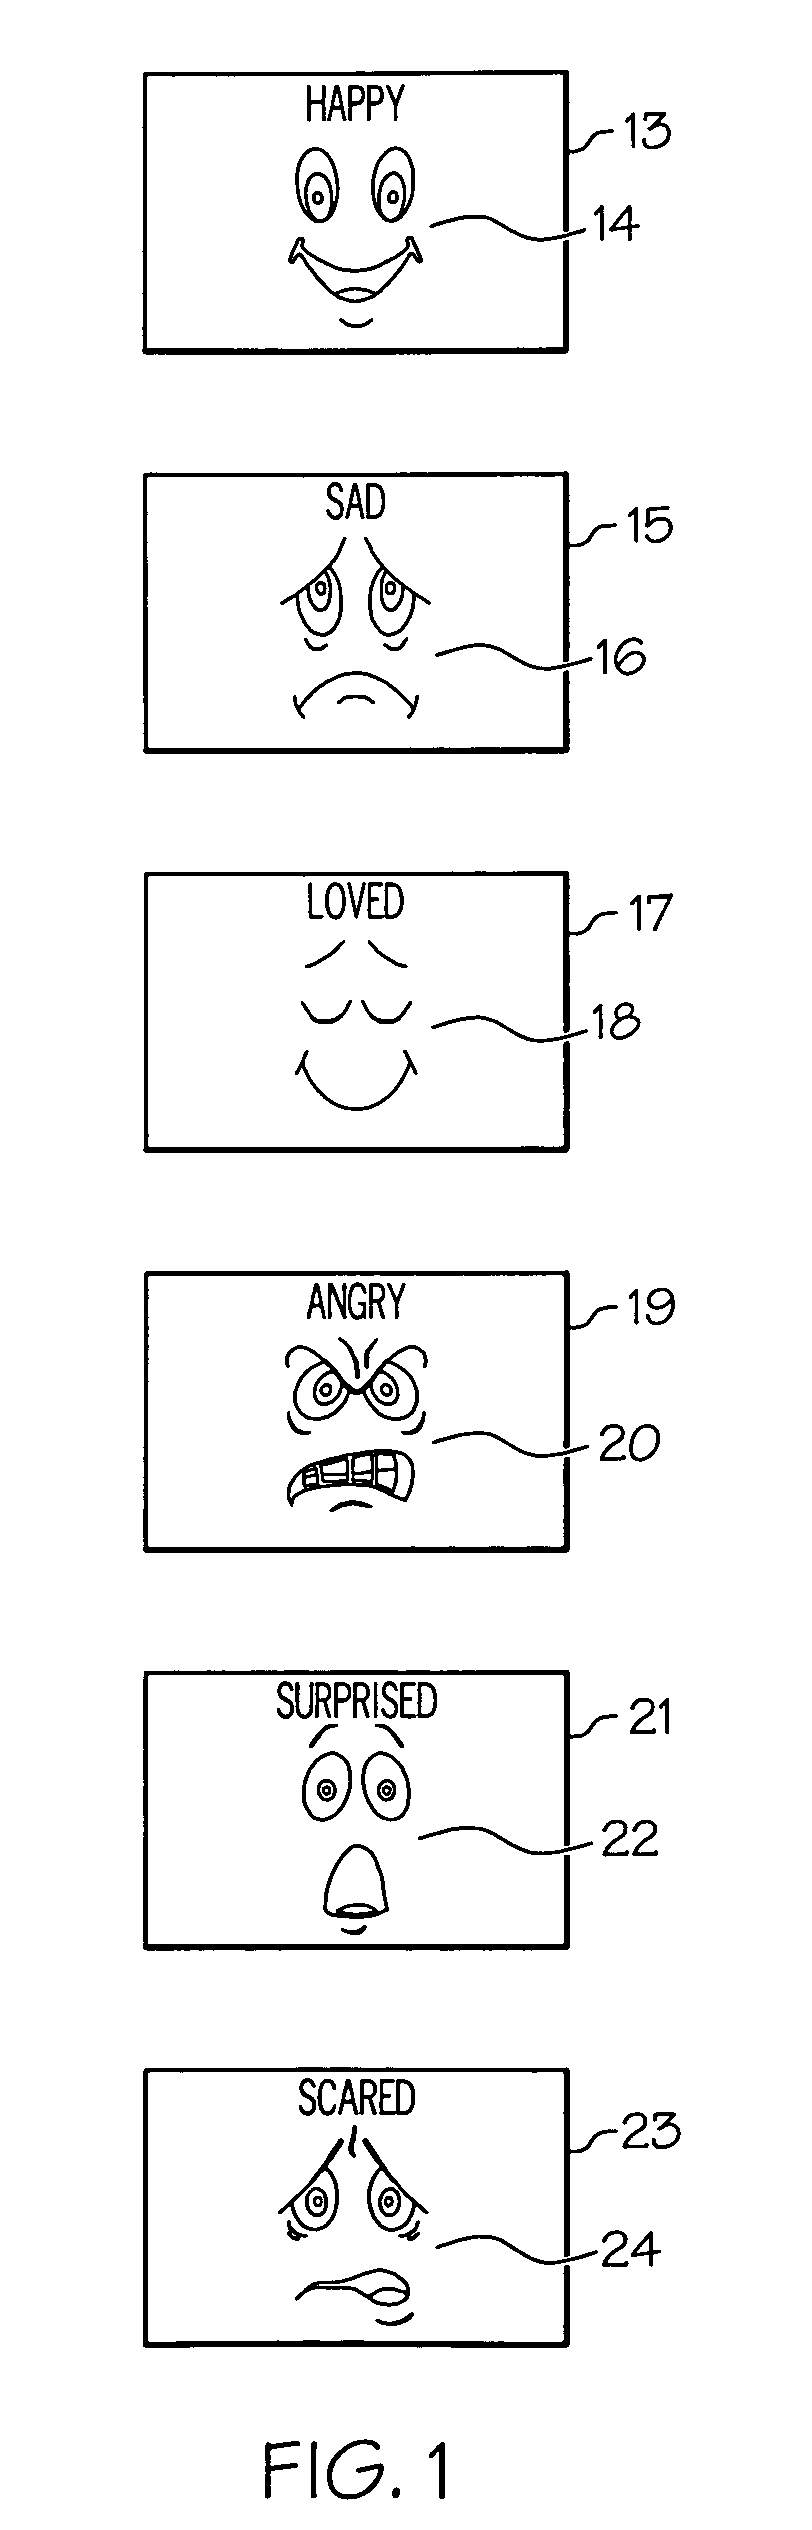 Method for improving the emotional quotient in infants and children